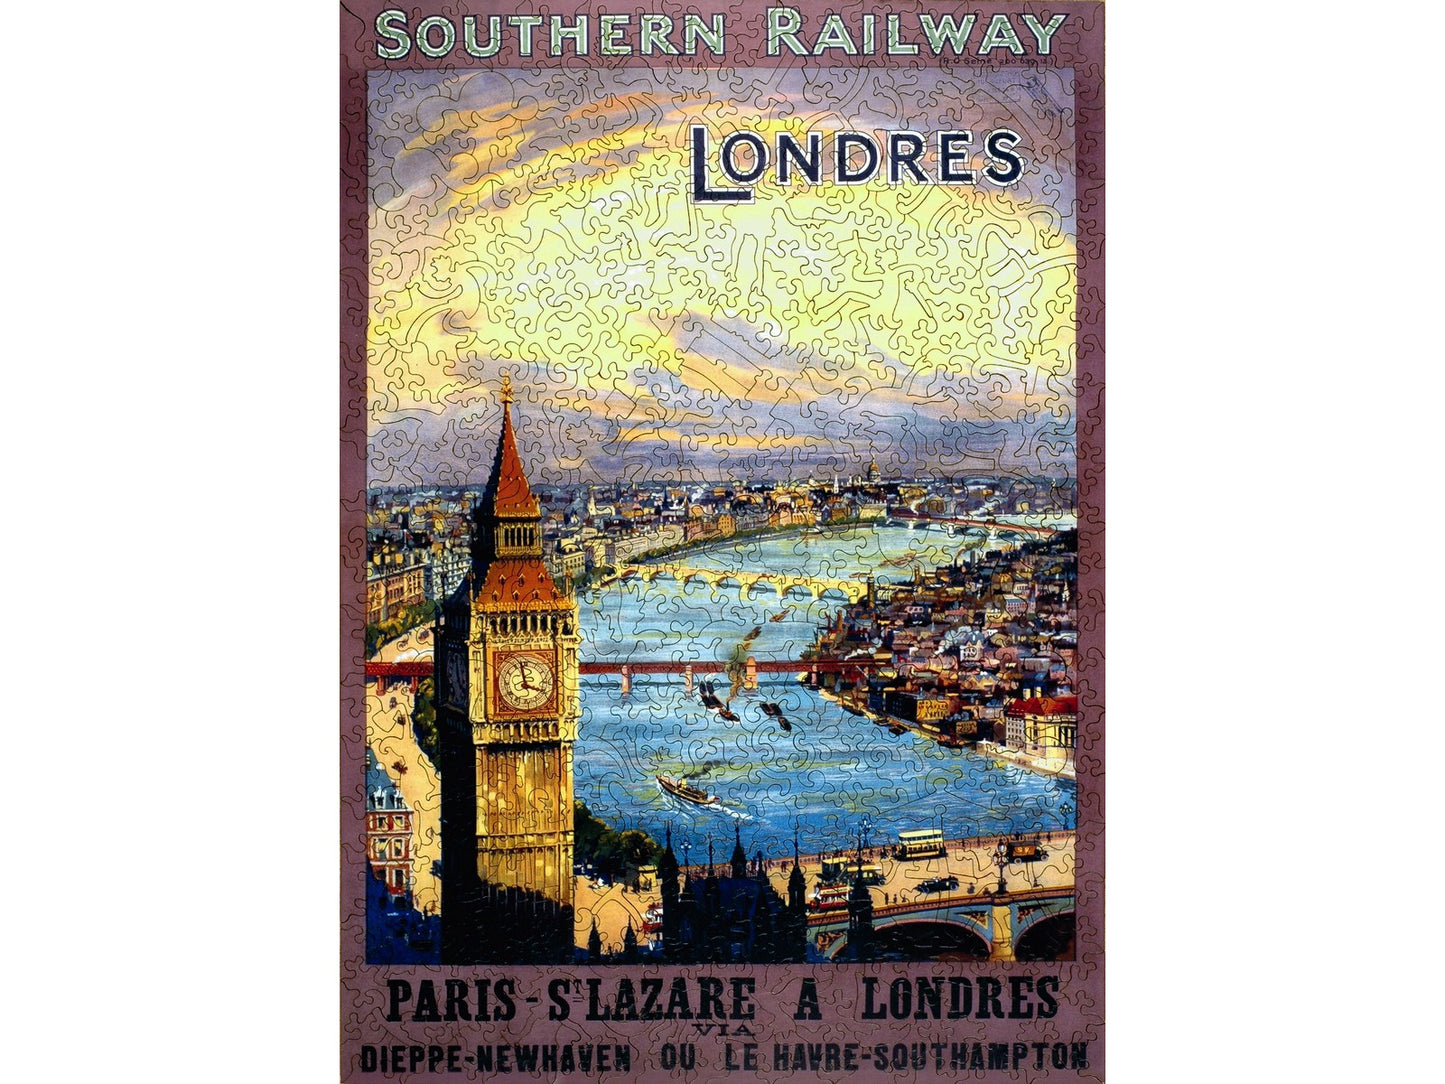 The front of the puzzle, Southern Railway, which shows the city of London with Big Ben in the foreground.